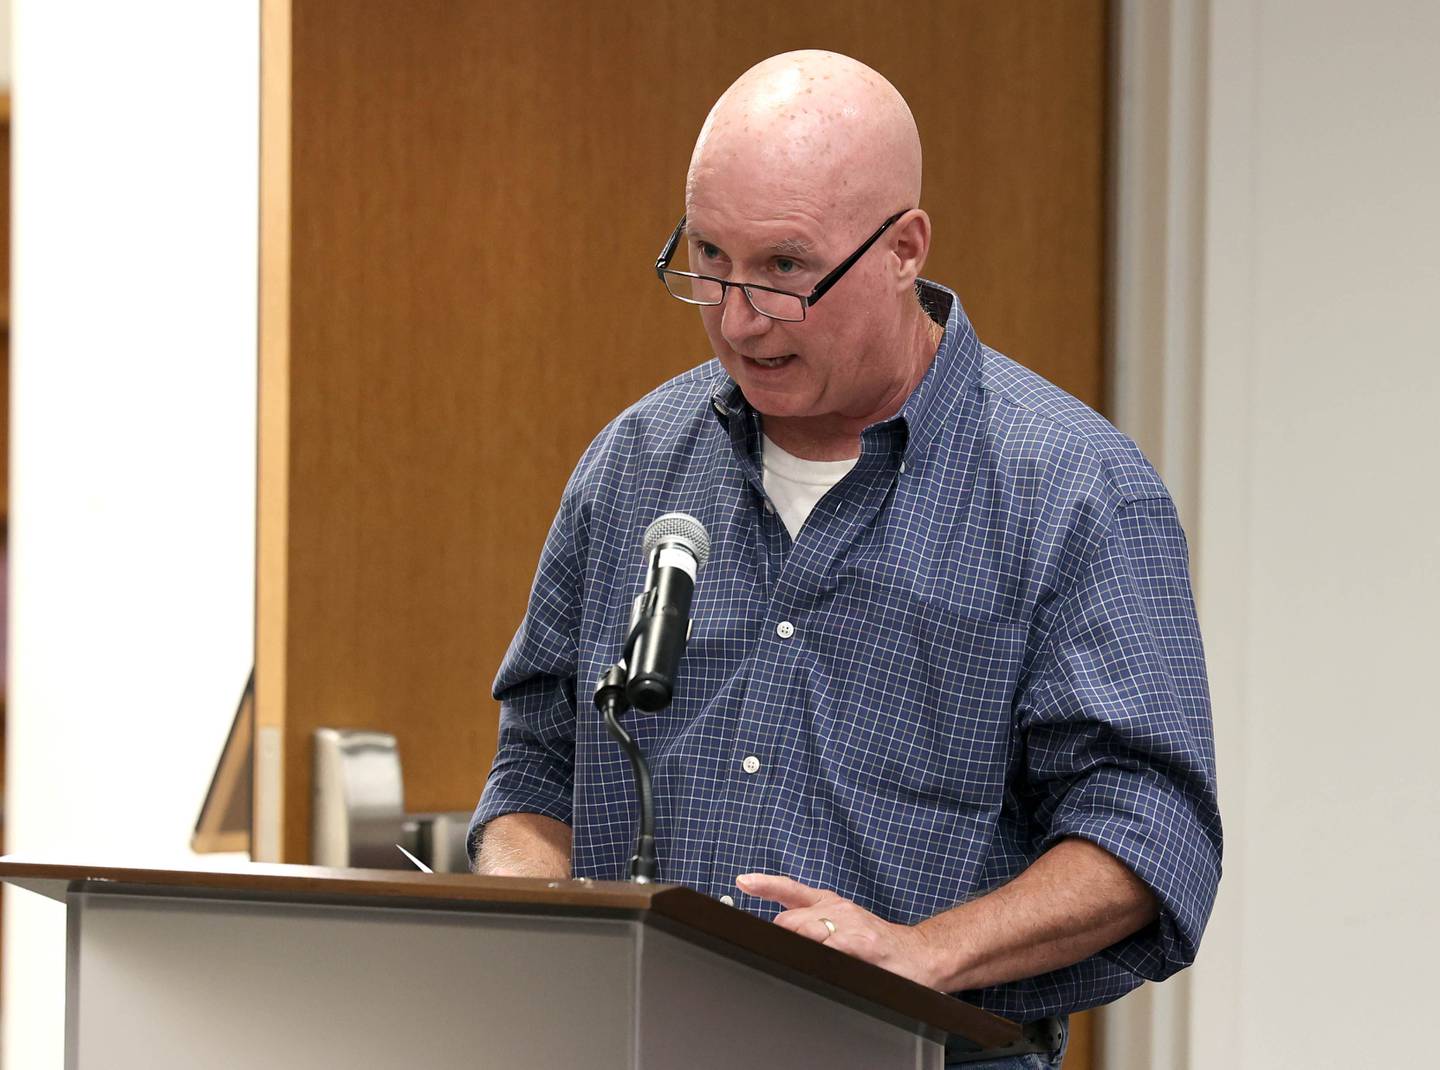 Dan Sears of D-N-J Properties, and owner of the building at 128 to 140 South Second Street, speaks Monday, July 10, 2023, at the DeKalb City Council meeting about the cities plan to consider acquiring and demolishing the 133-year-old building to provide space for additional downtown parking.